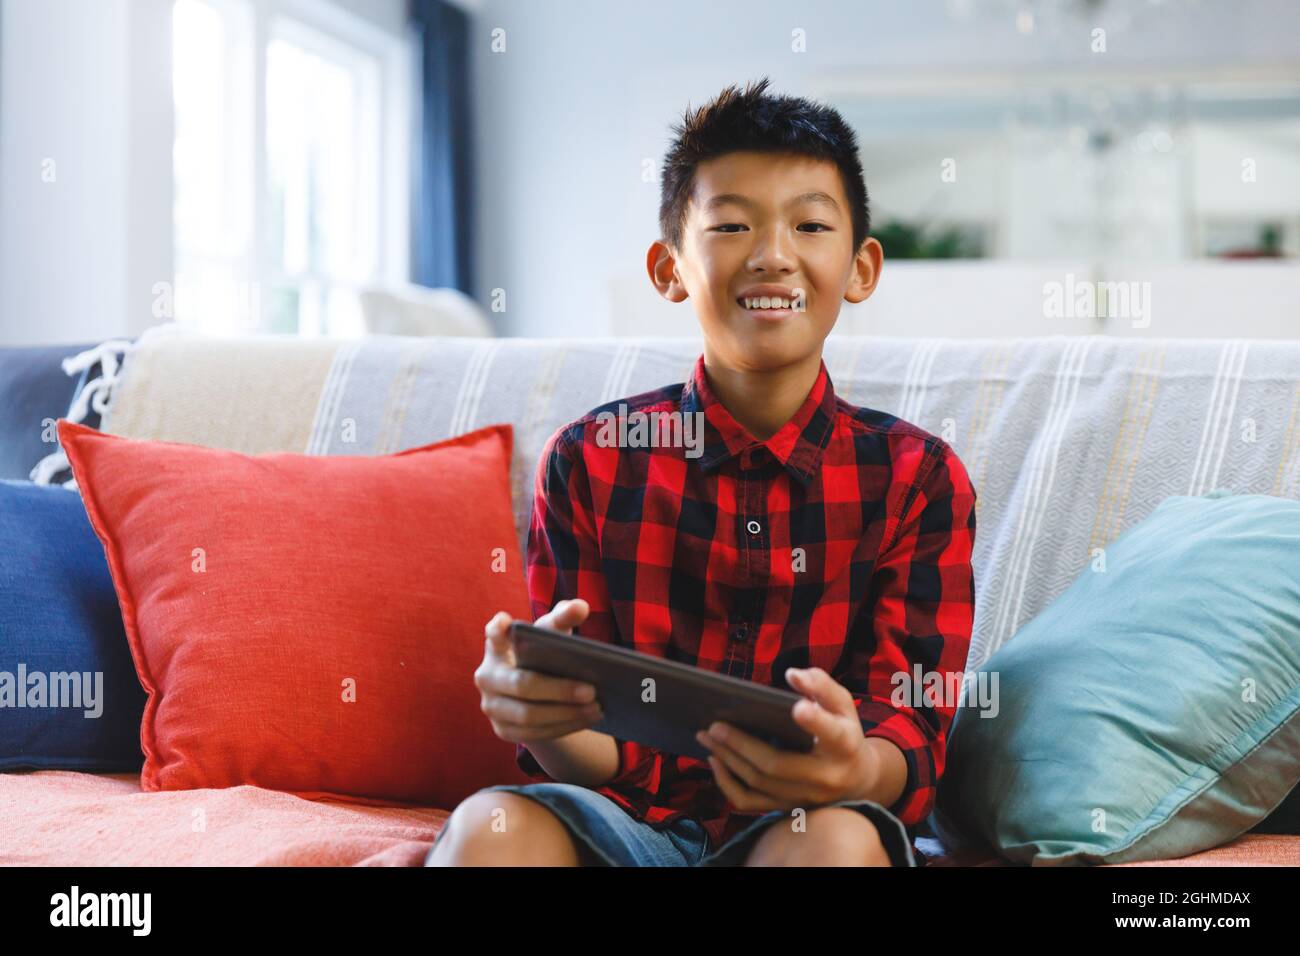 Portrait of smiling asian boy sitting on couch and using tablet Stock Photo